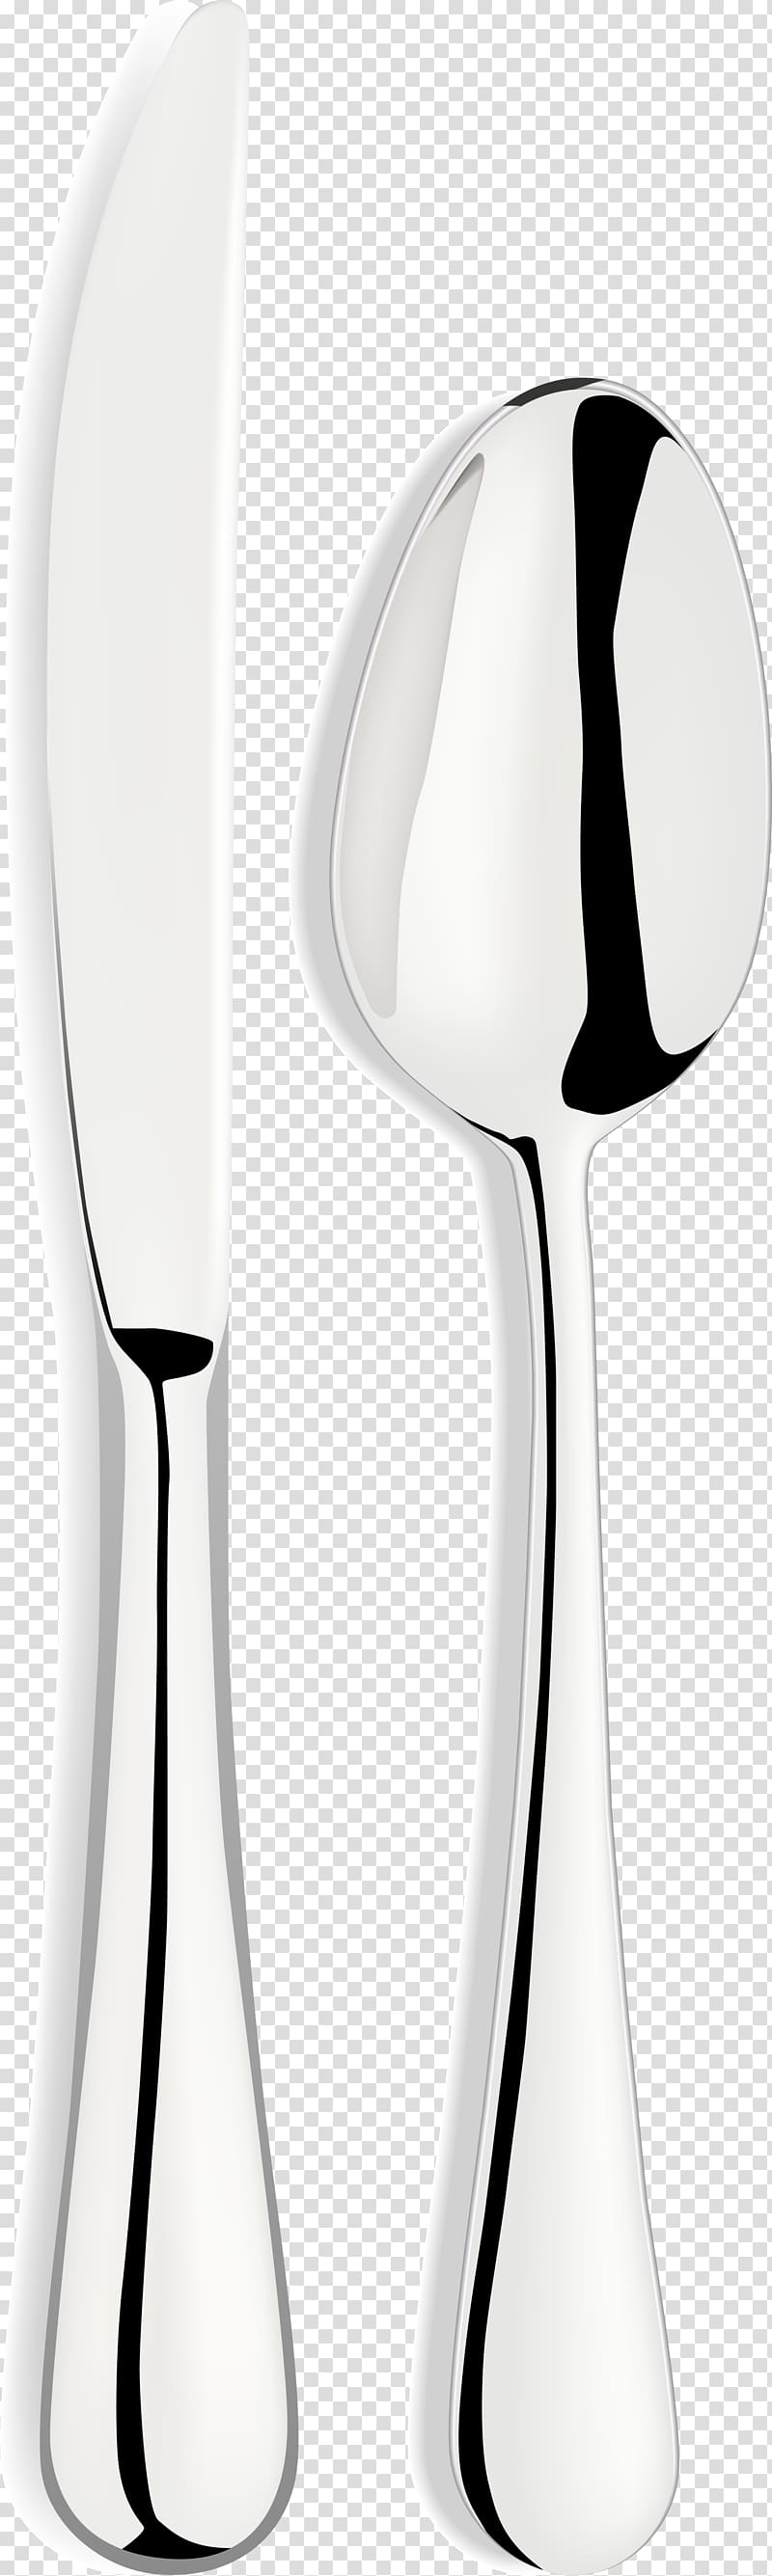 Tableware Cutlery Plate, Silver flatware transparent background PNG clipart